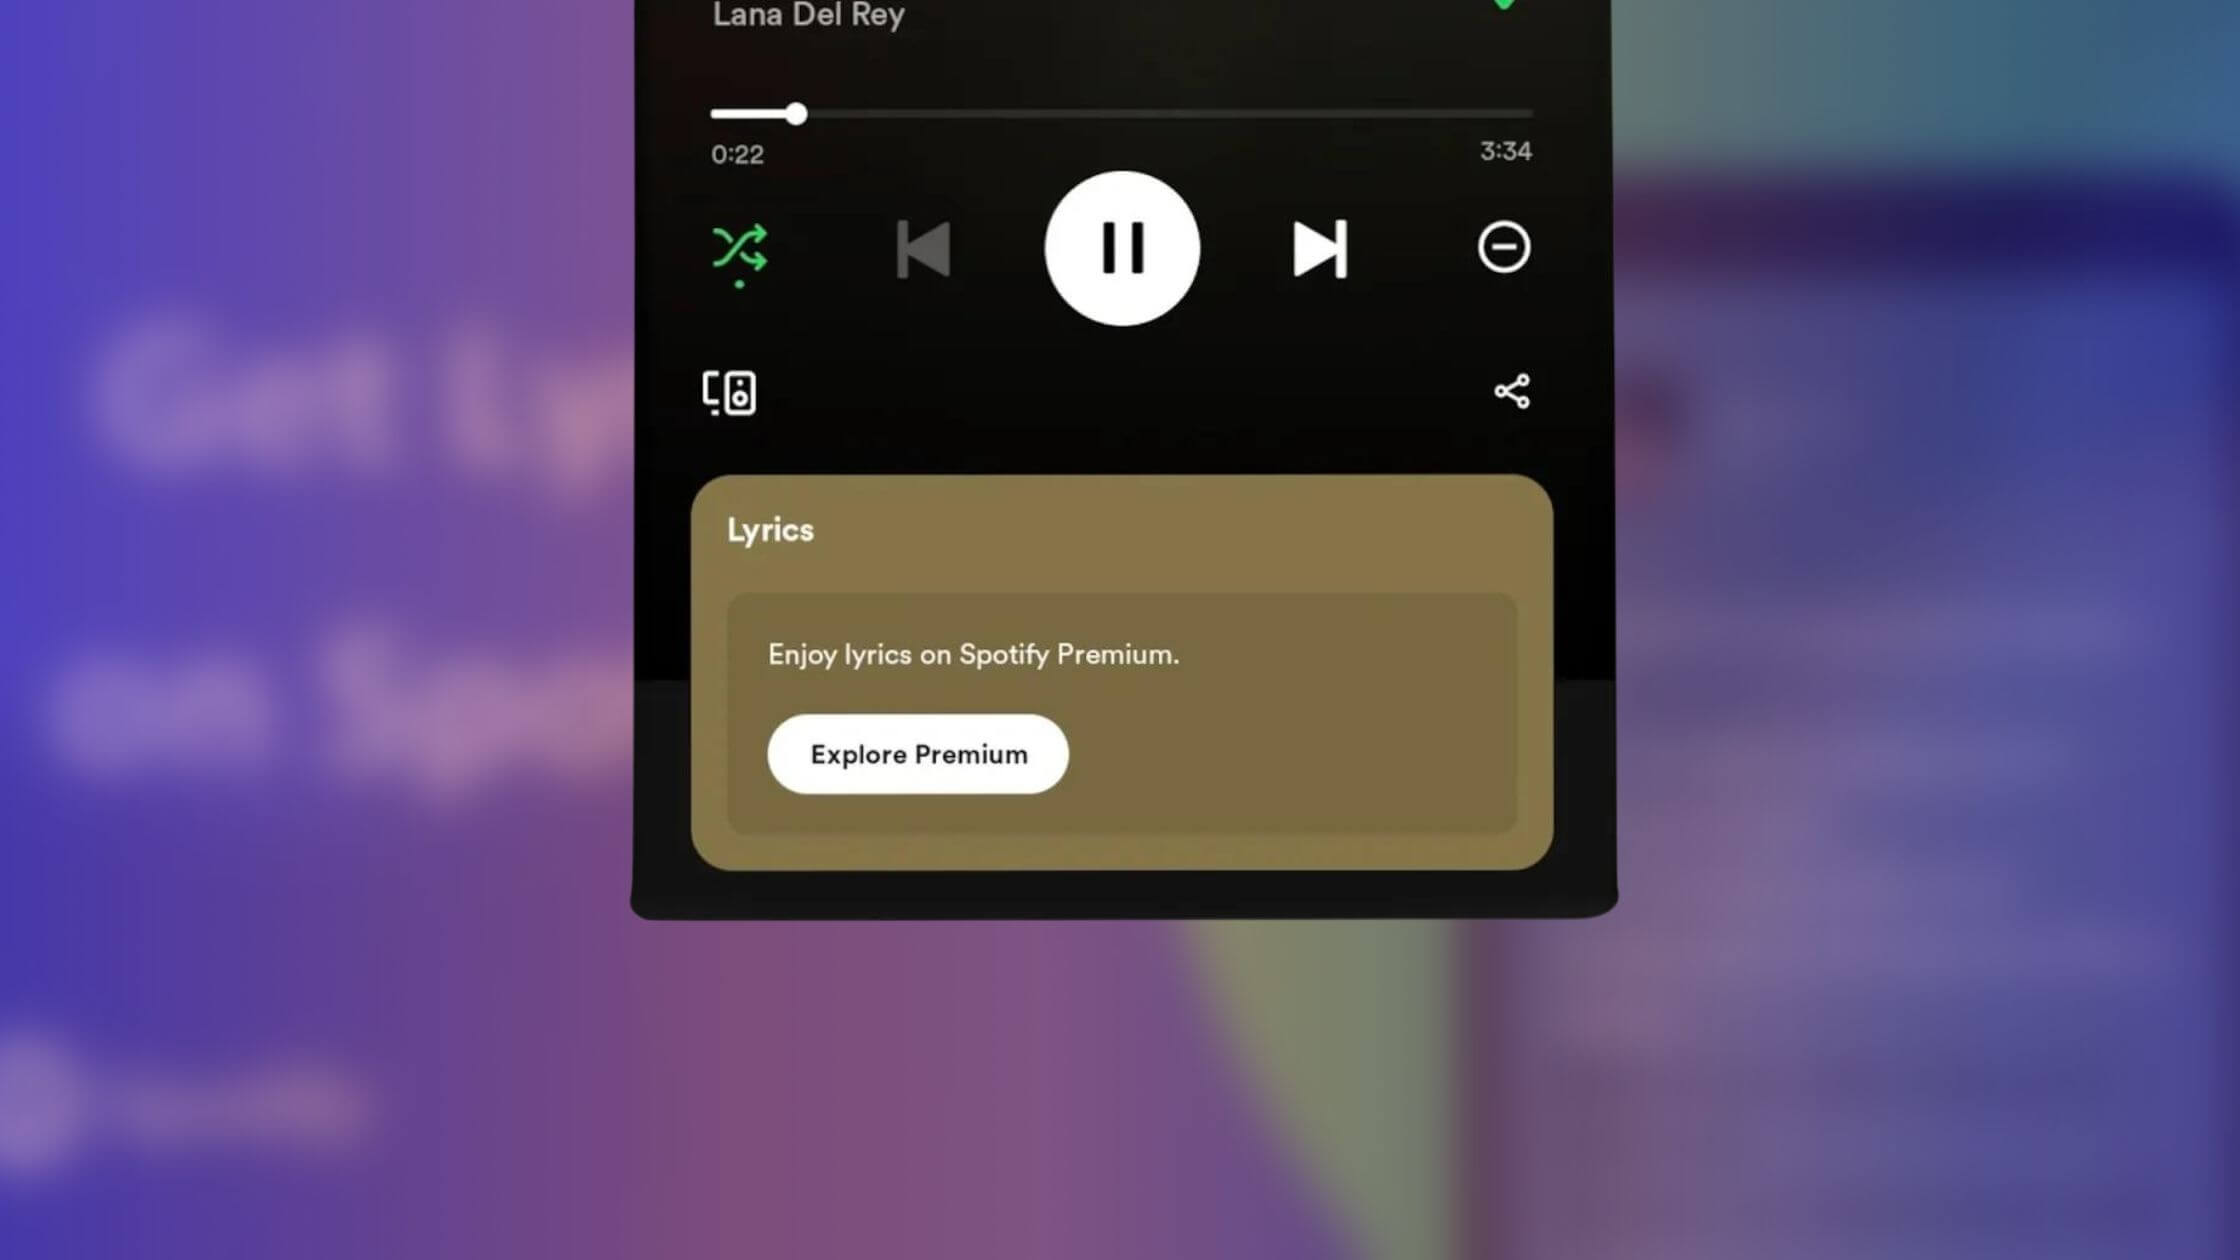 Spotify tests restricting lyrics feature to paying subscribers